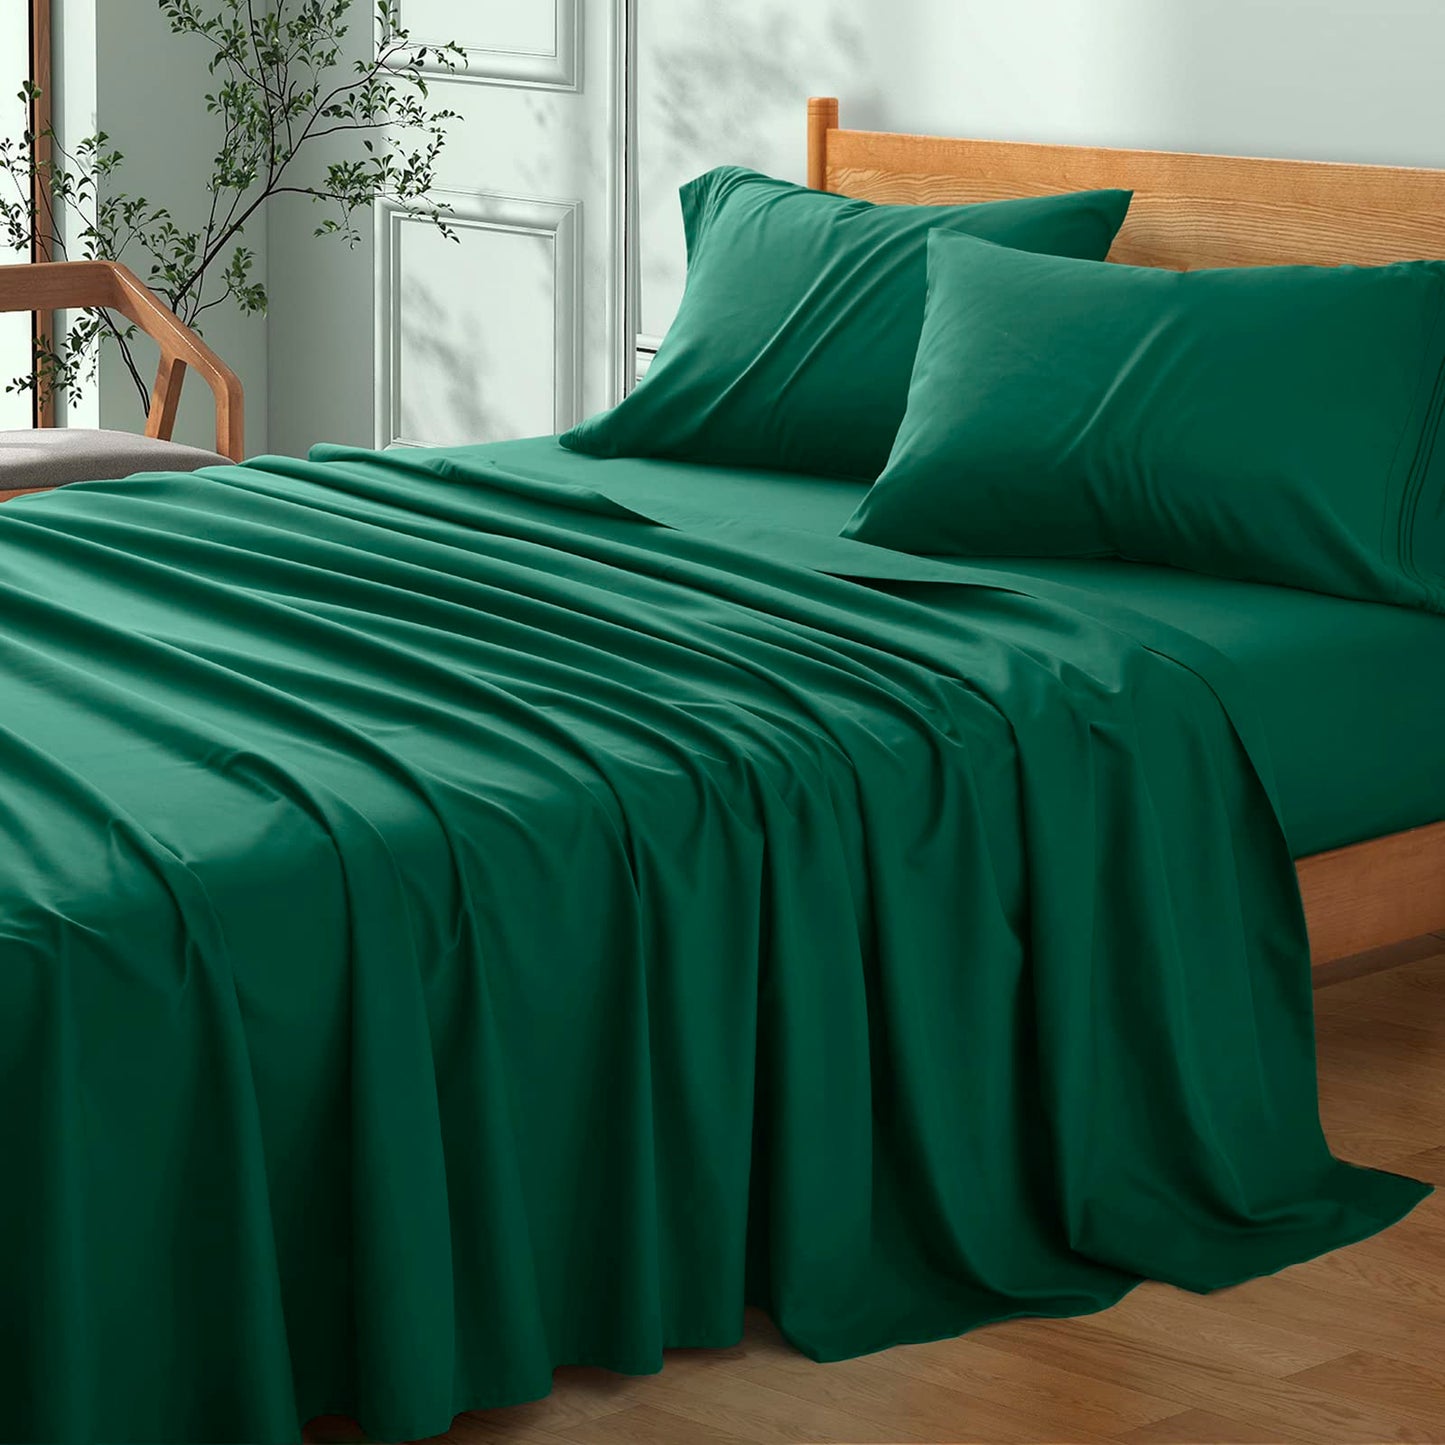 SiinvdaBZX 2 Pack Full Size Flat Sheet Only, Soft Breathable Brushed Microfiber Fabric Bed Top Sheet Only - Wrinkle, Fade Resistant - Forest Green